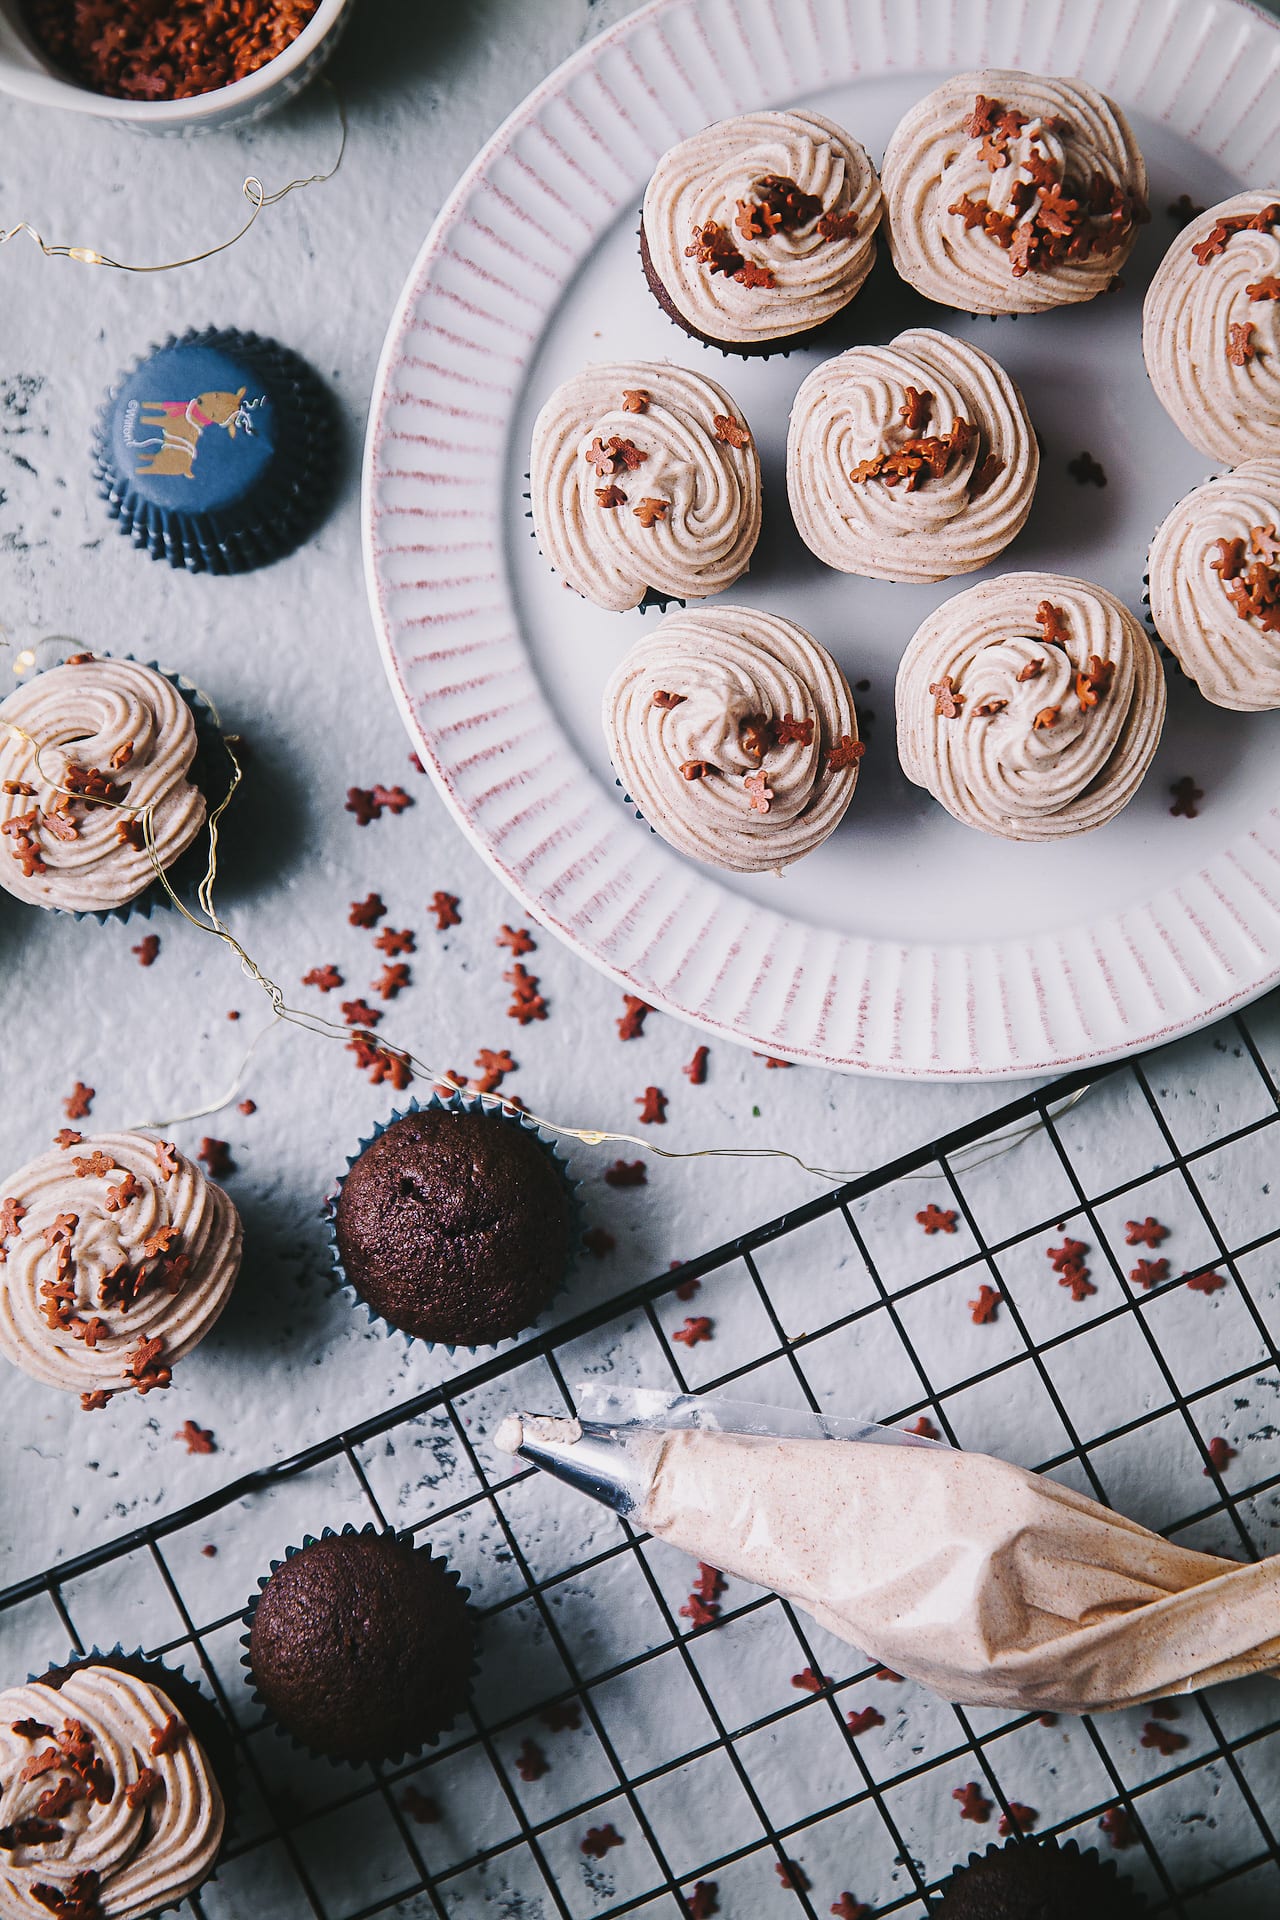 Holiday Treats | Playful Cooking #cupcakes #gingerbread #cupcakes #buttercream #foodphotography